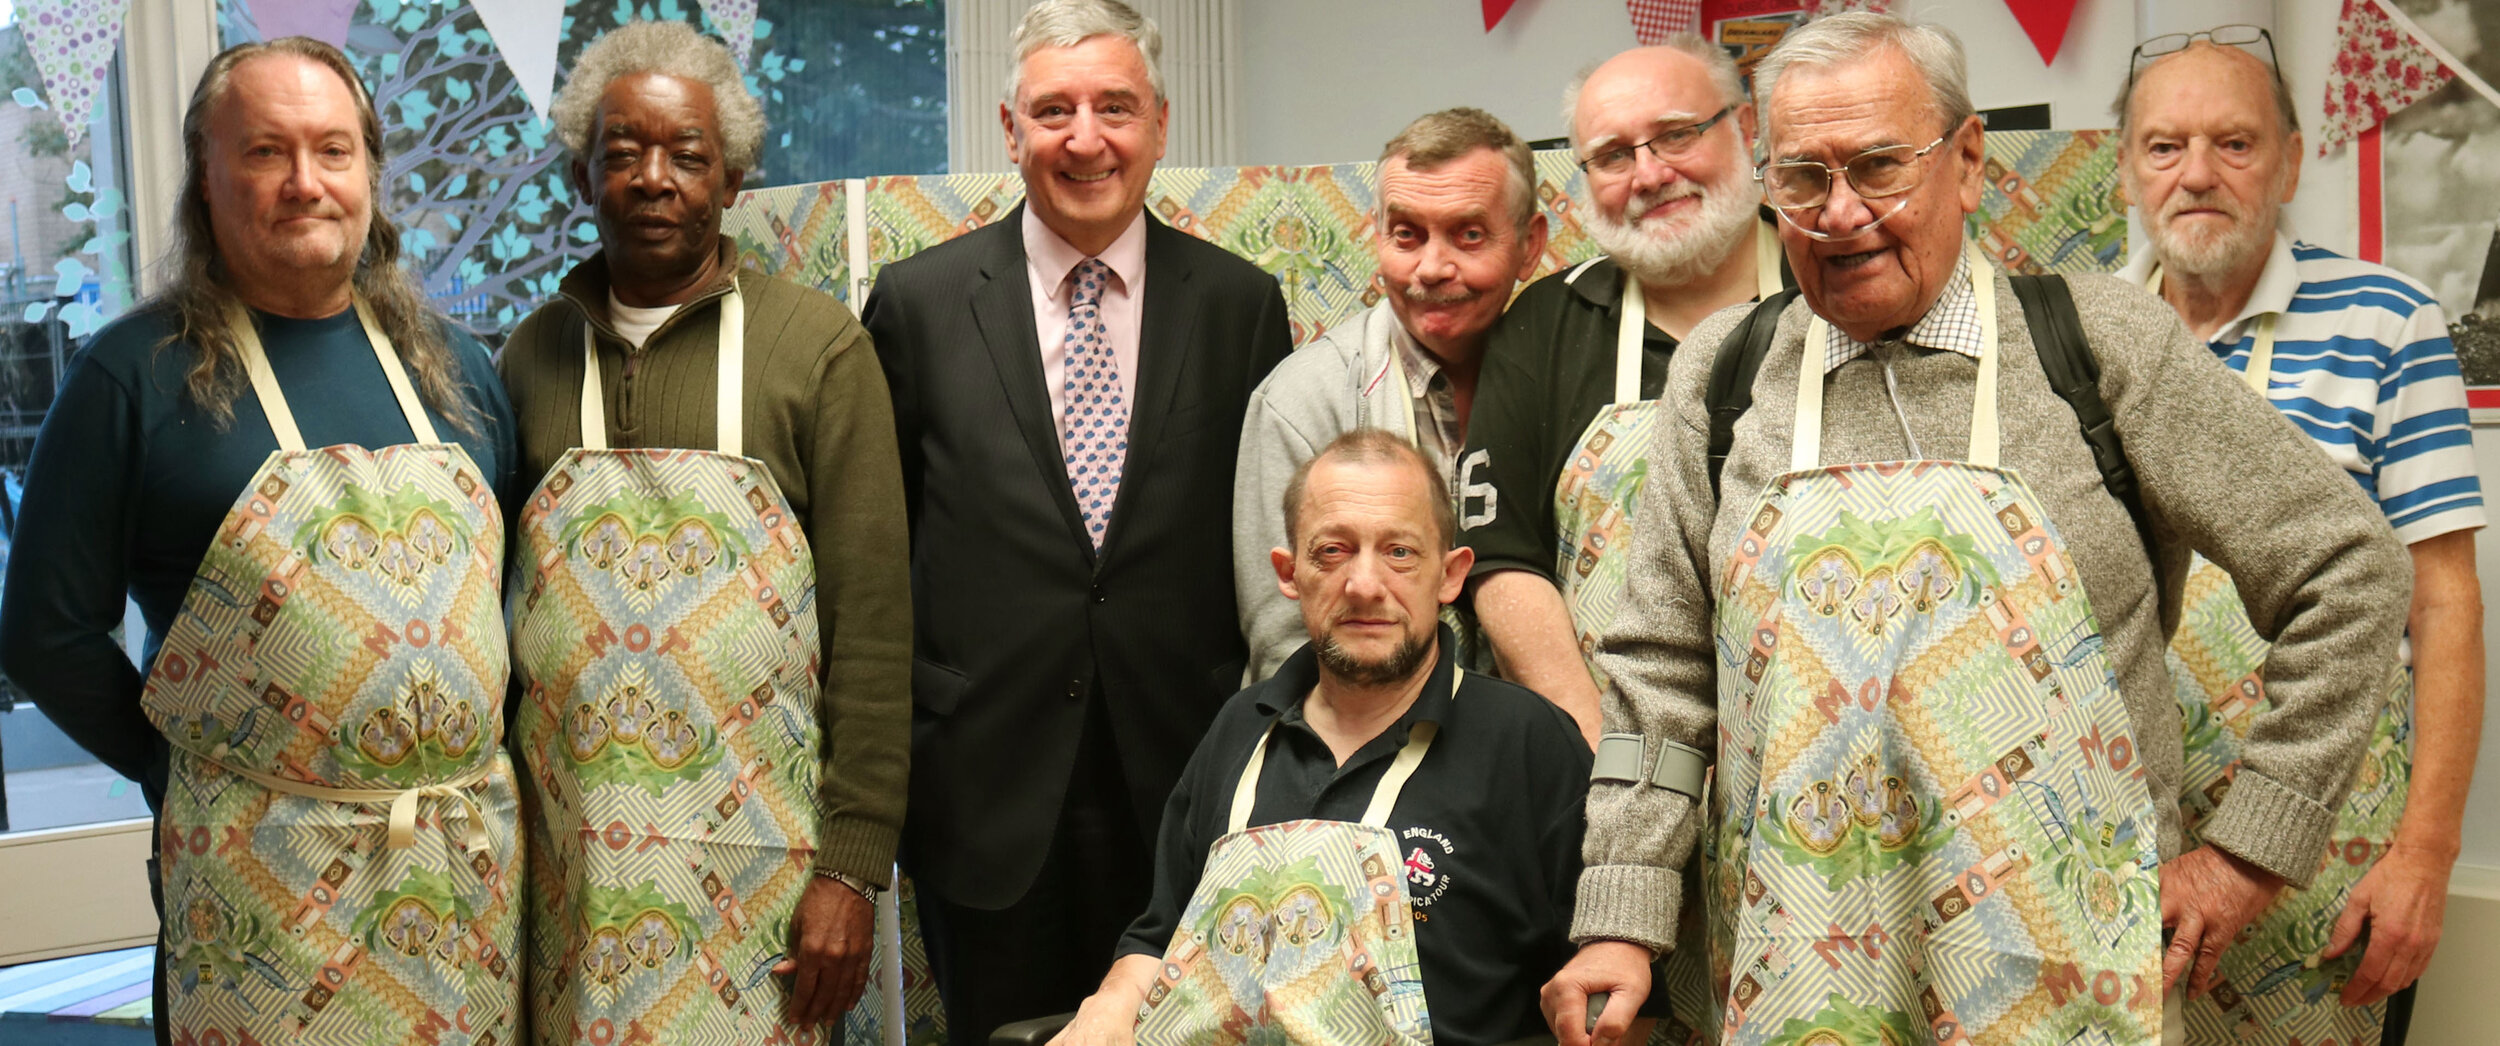 The Men's Cabin with MP Jim Fitzpatrick. Left to right = Rex; Clifton; (MP Jim Fitzpatrick); Dave; Paul (in wheelchair); Brian; Joseph; George.JPG